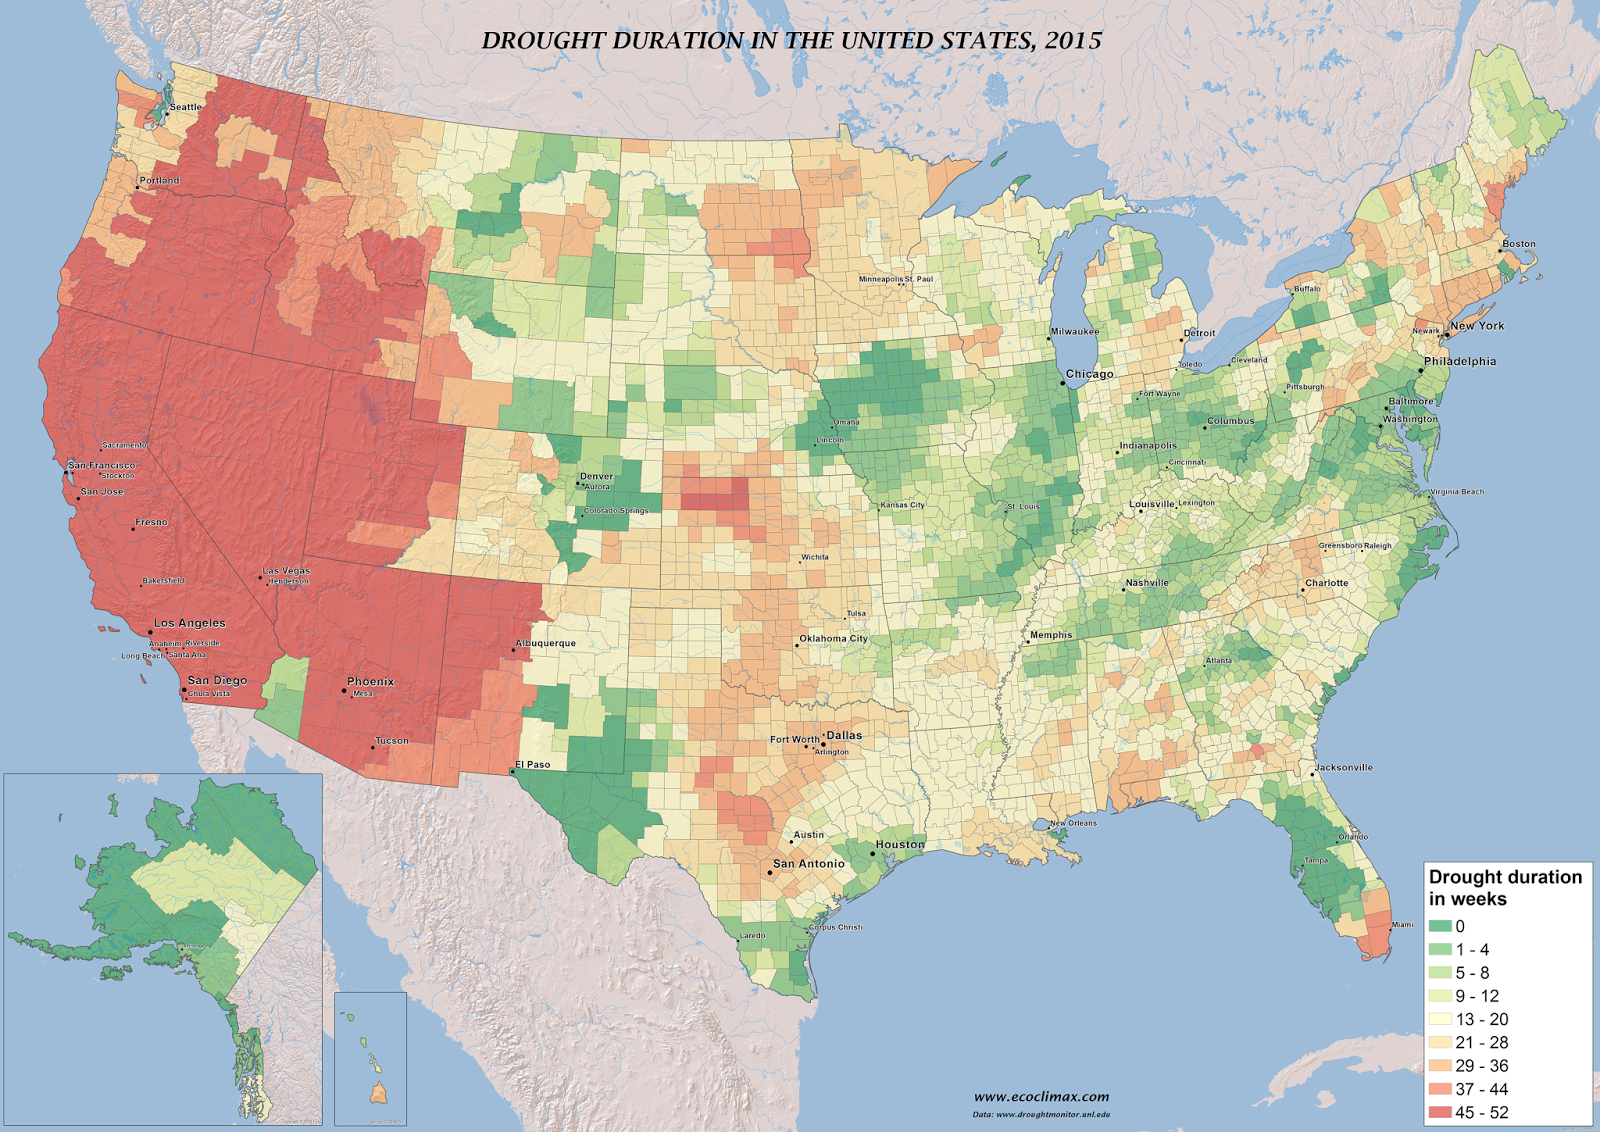 Drought duration in the United States (2015)